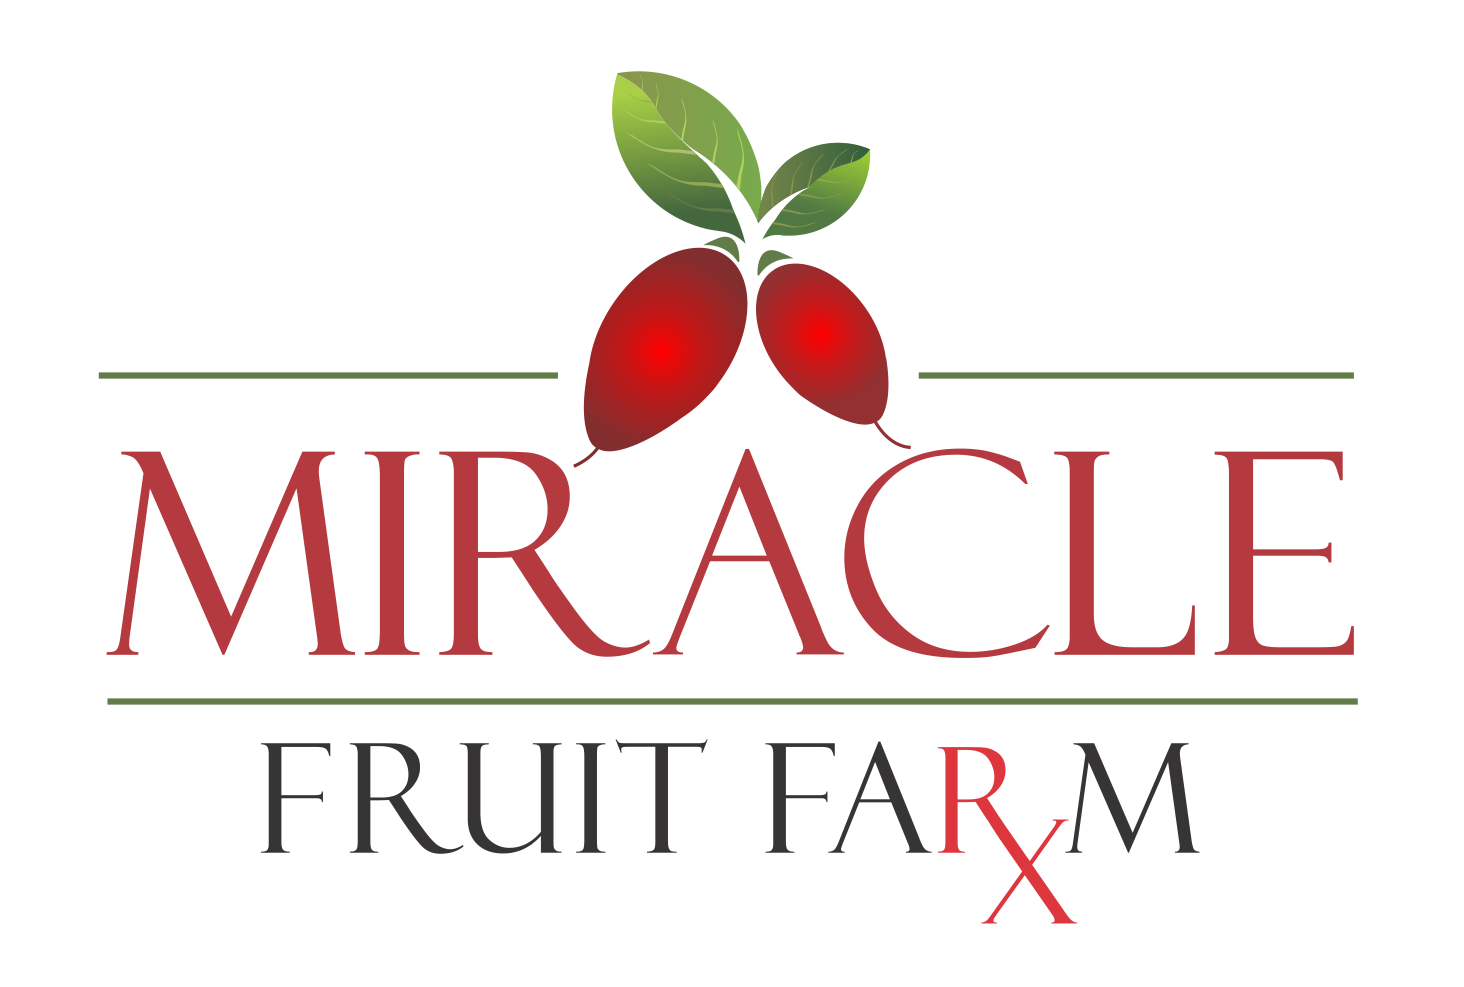 Business logo of Miracle Fruit Farm